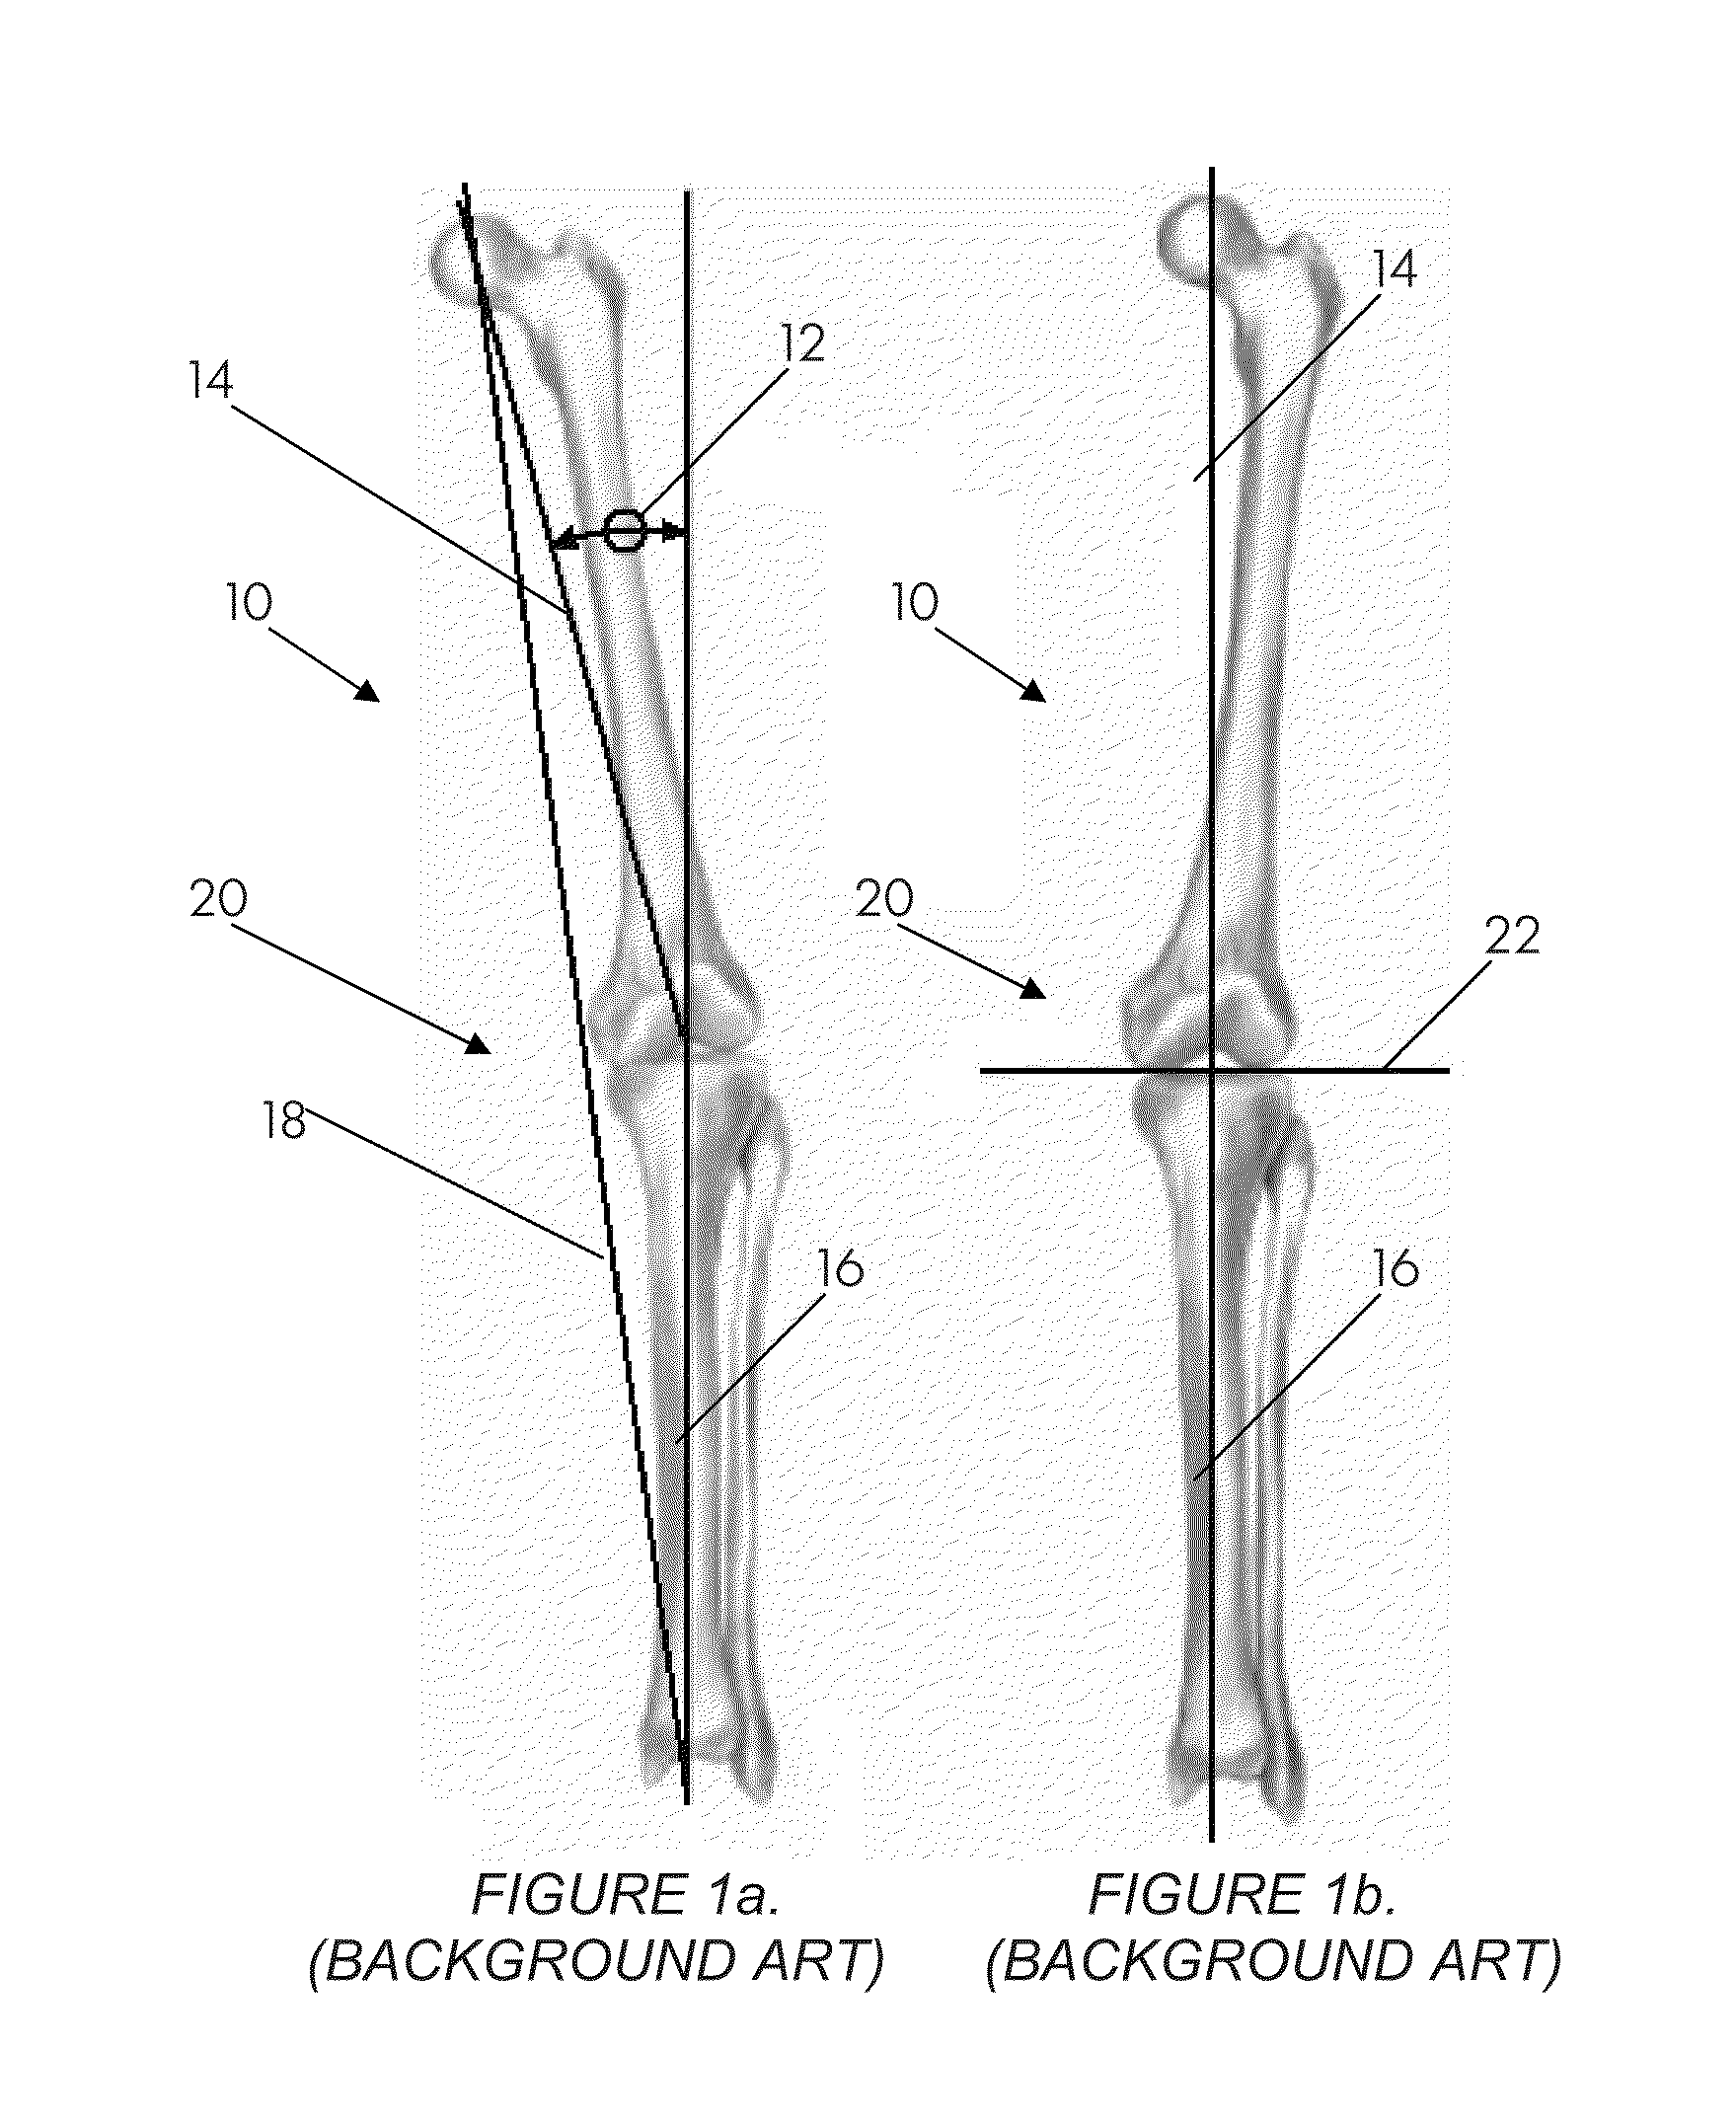 Systems and methods for determining the mechanical axis of a femur